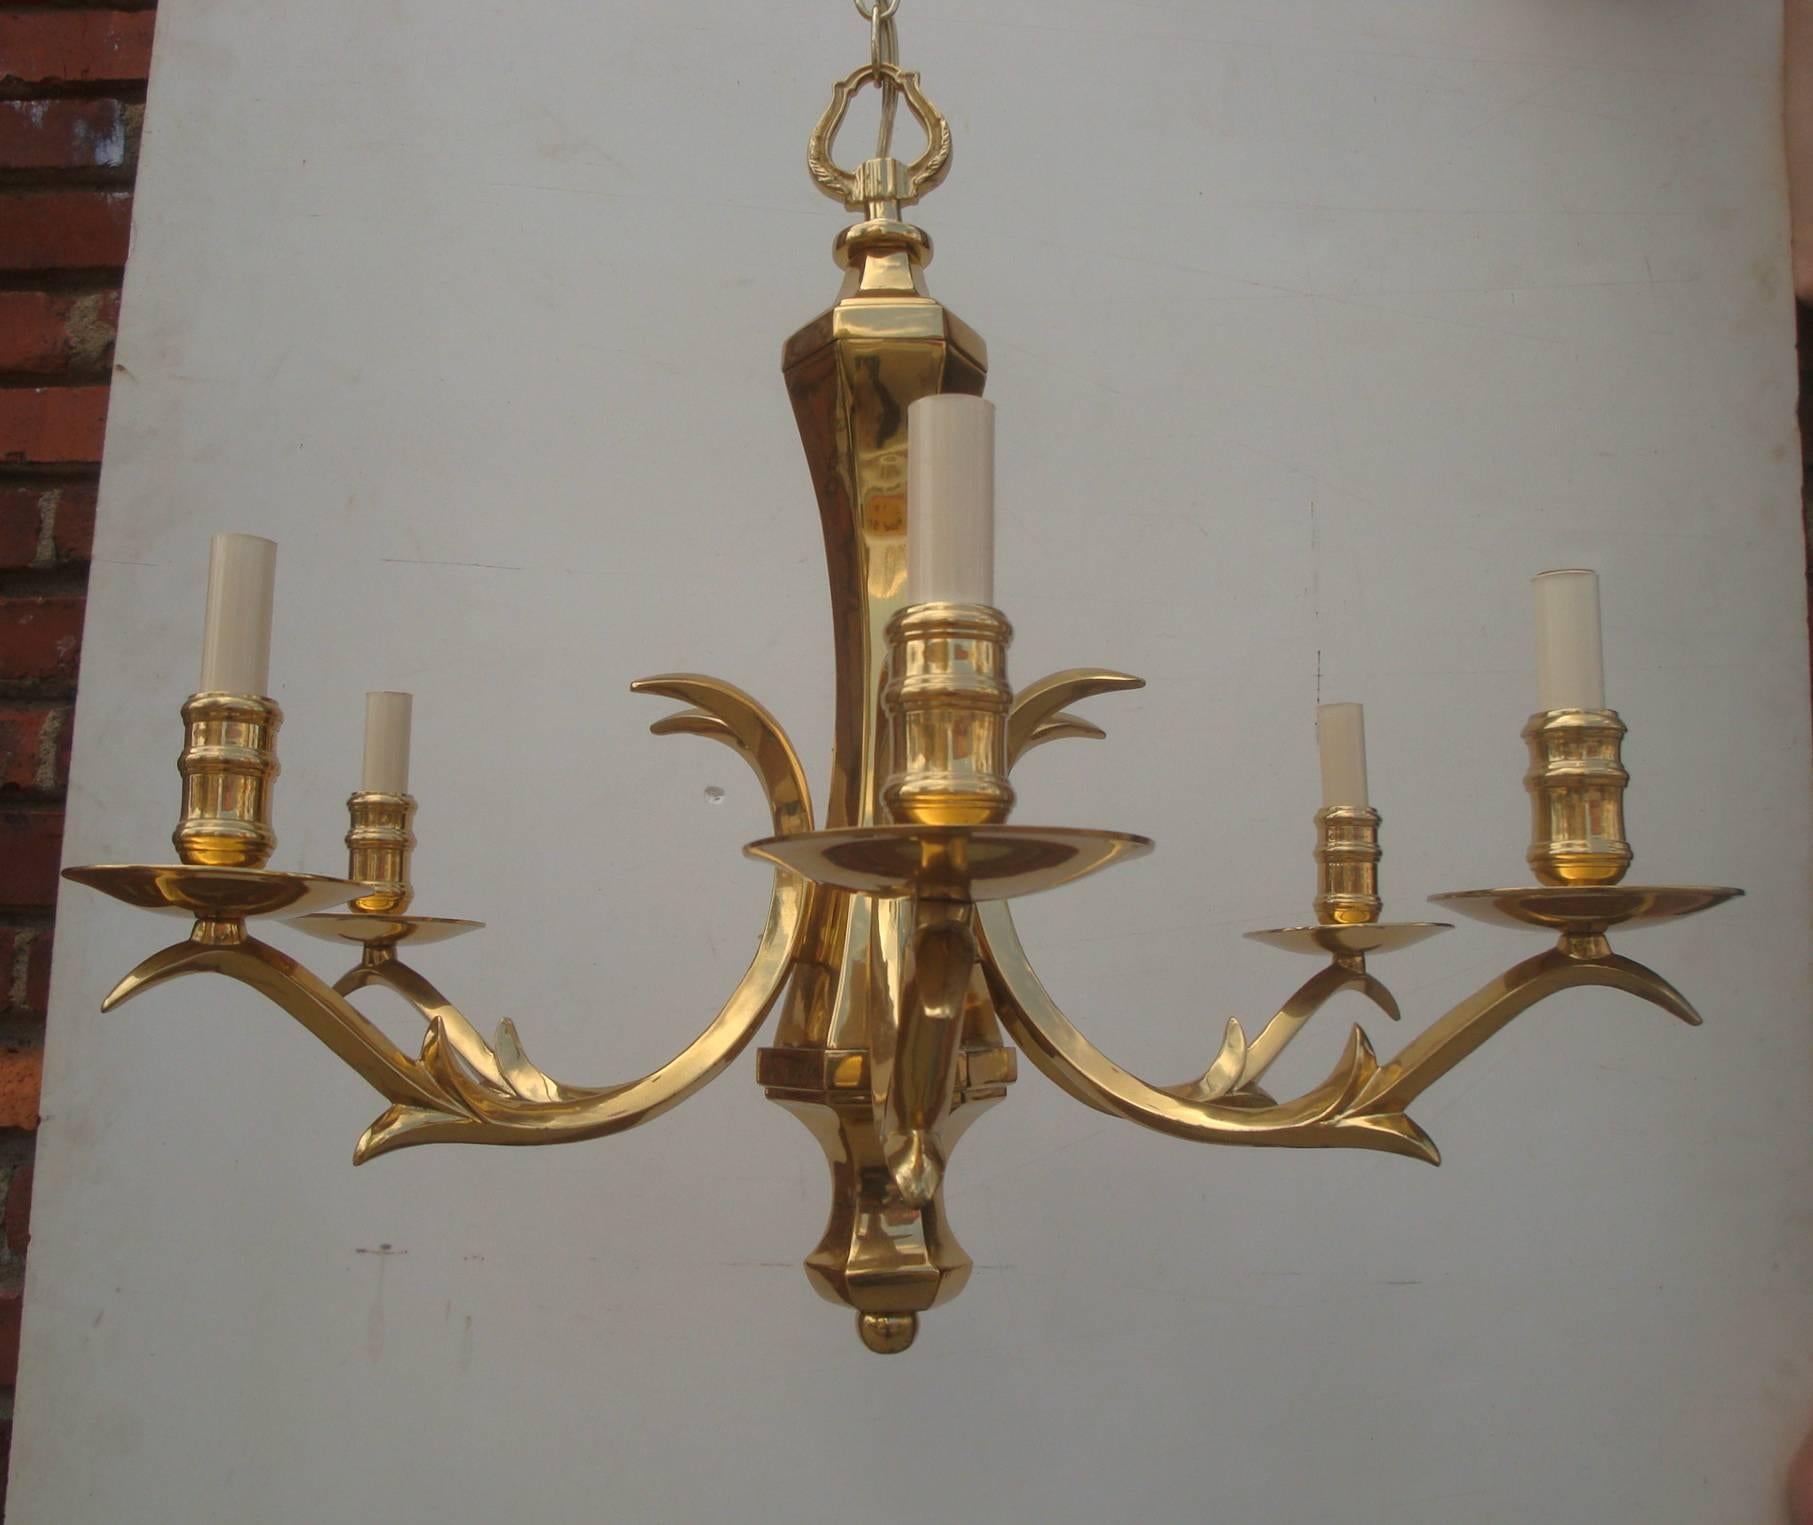 Offered is an amazing, 1970s polished brass chandelier with six lights and branching arms that resemble deer antler points. The center body is a curvy six-sided shape, and the arm branches are squared tubes rather than round, giving the piece a